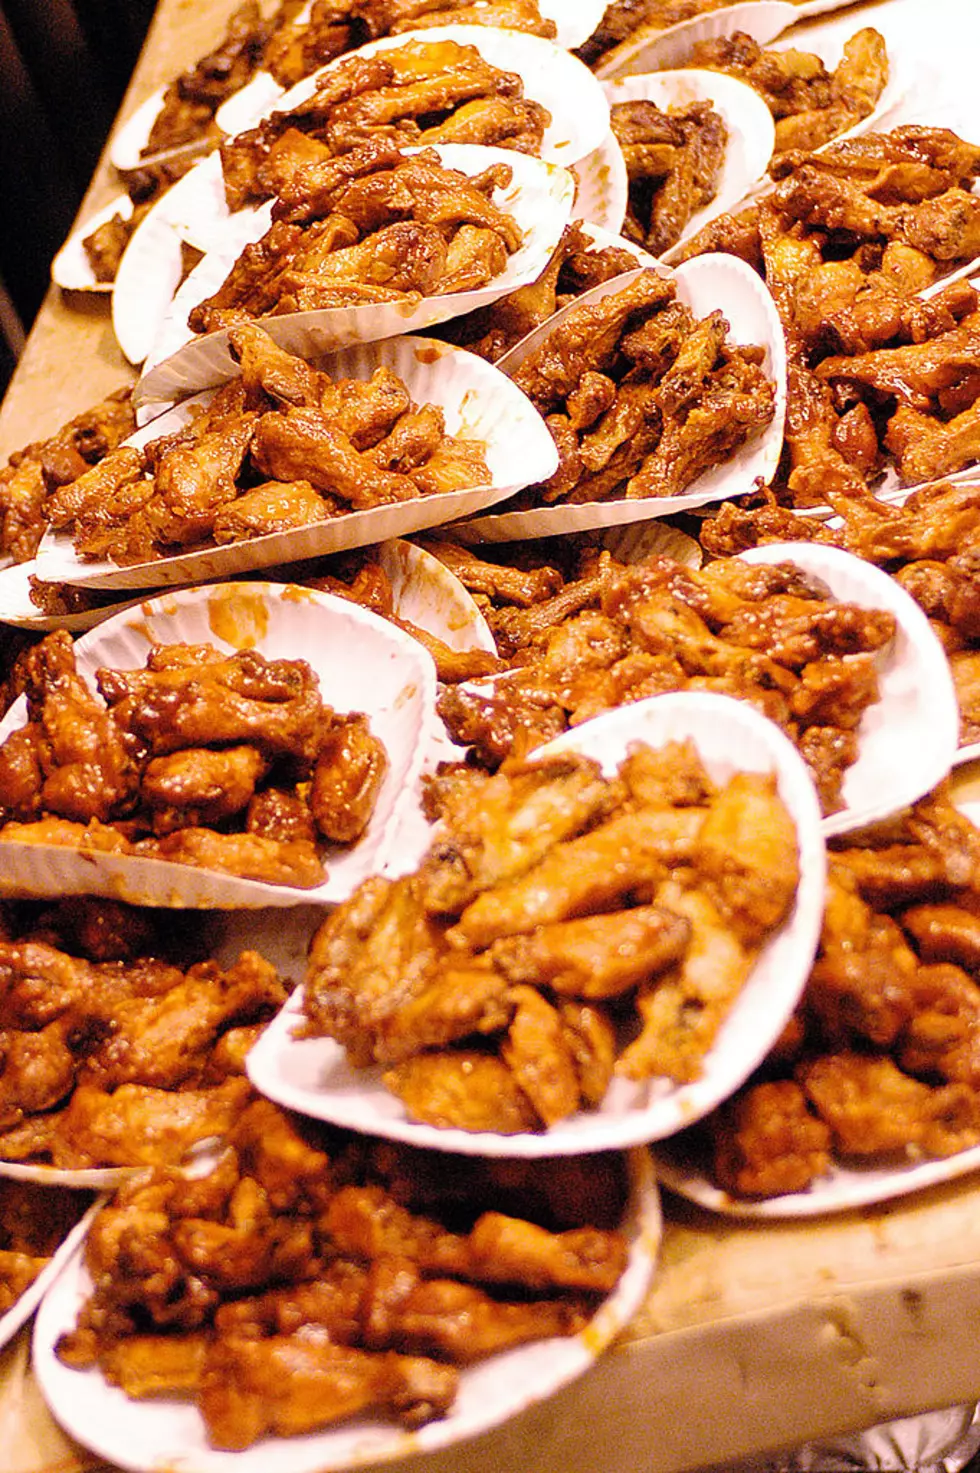 Superbowl Chicken Wings Record & Mexico’s Ban on GMO Corn